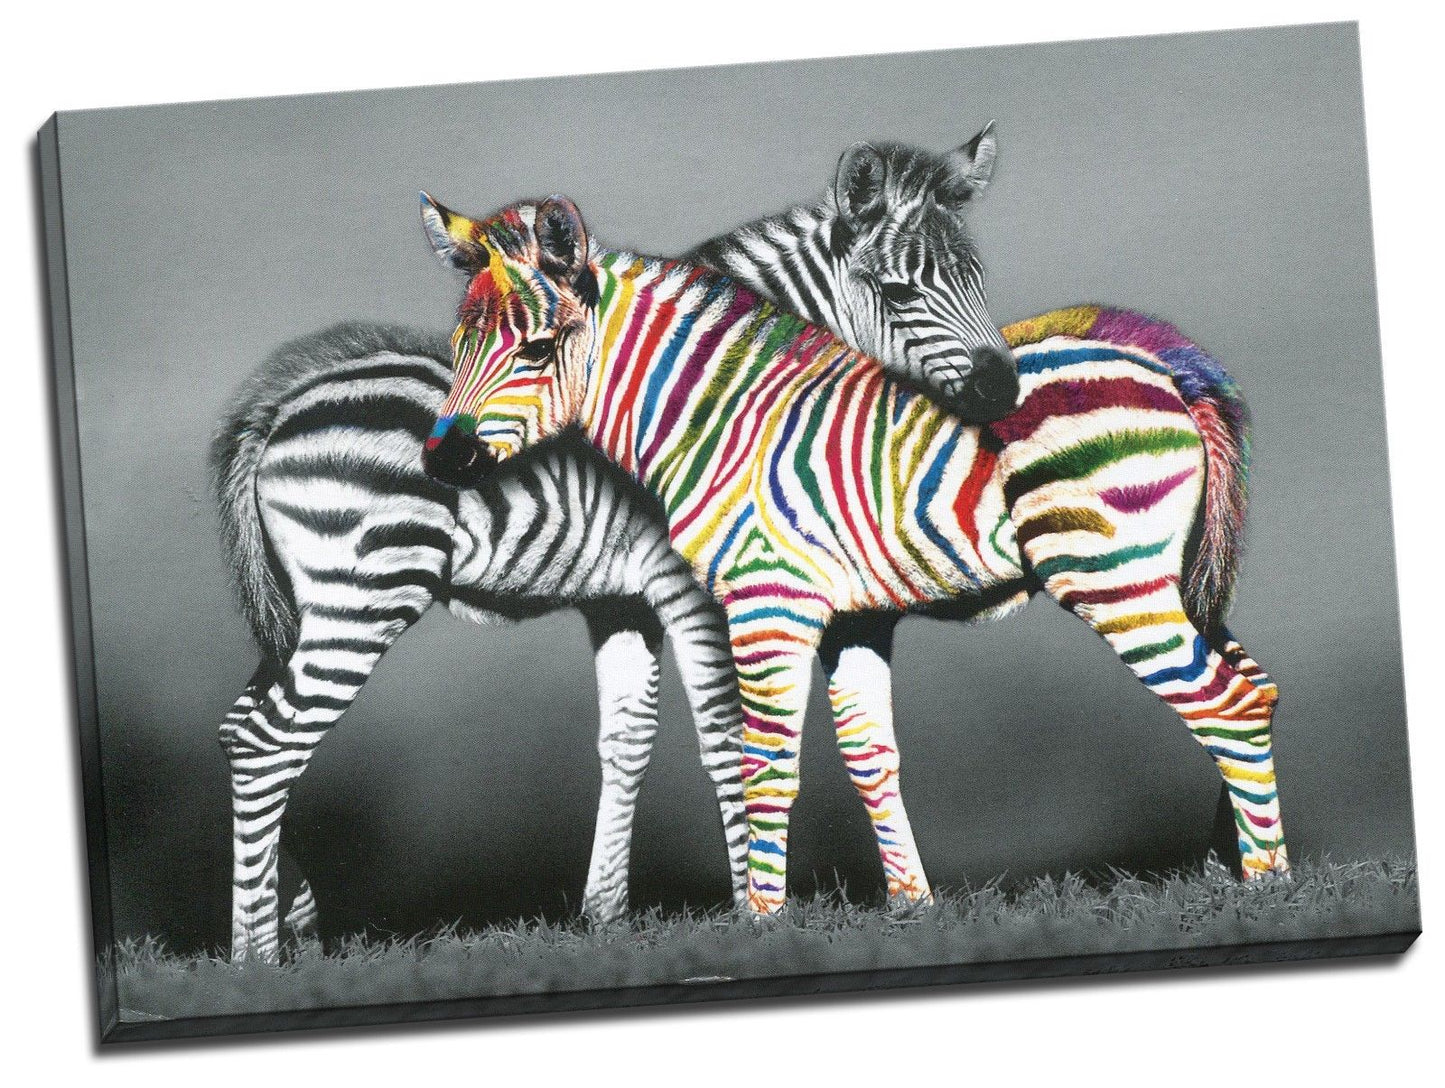 Zebra Stretched Canvas Prints Framed Hanging Wall Art Giclee Home Decor Painting